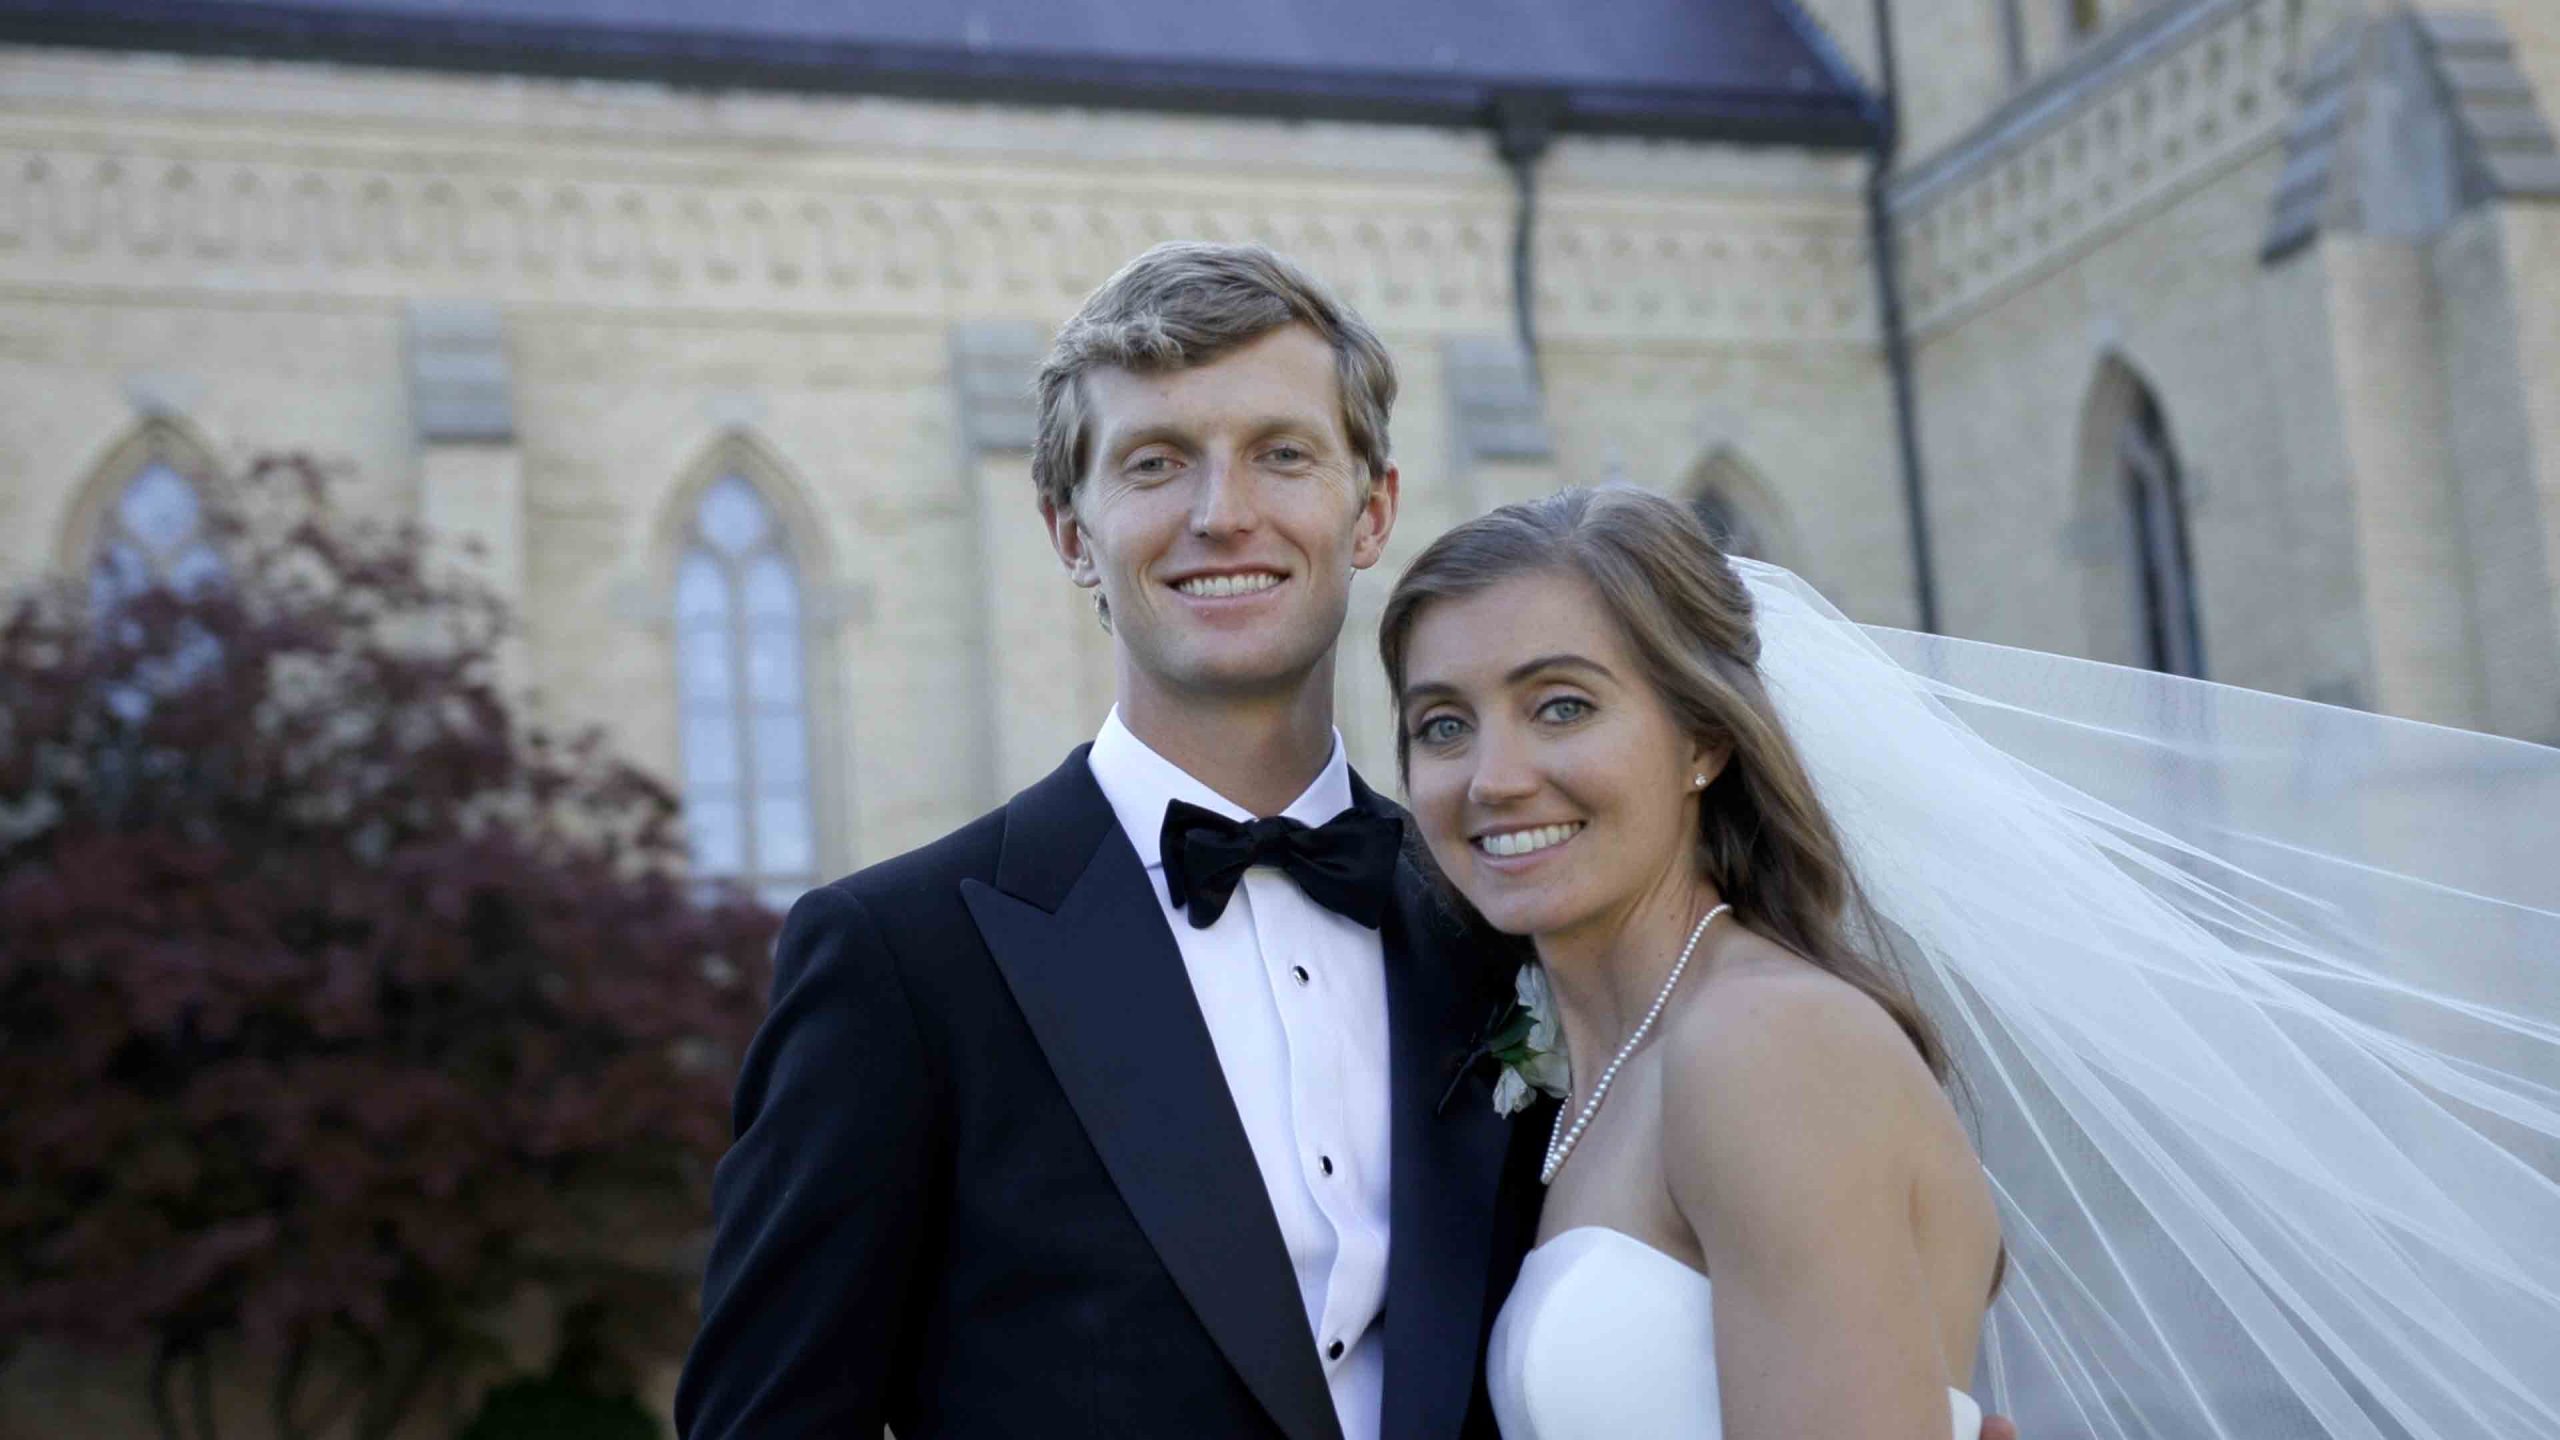 Married at Notre Dame! Check out a Notre Dame wedding filmed at the Basilica of the Sacred Heart Church with the reception at The Brick.